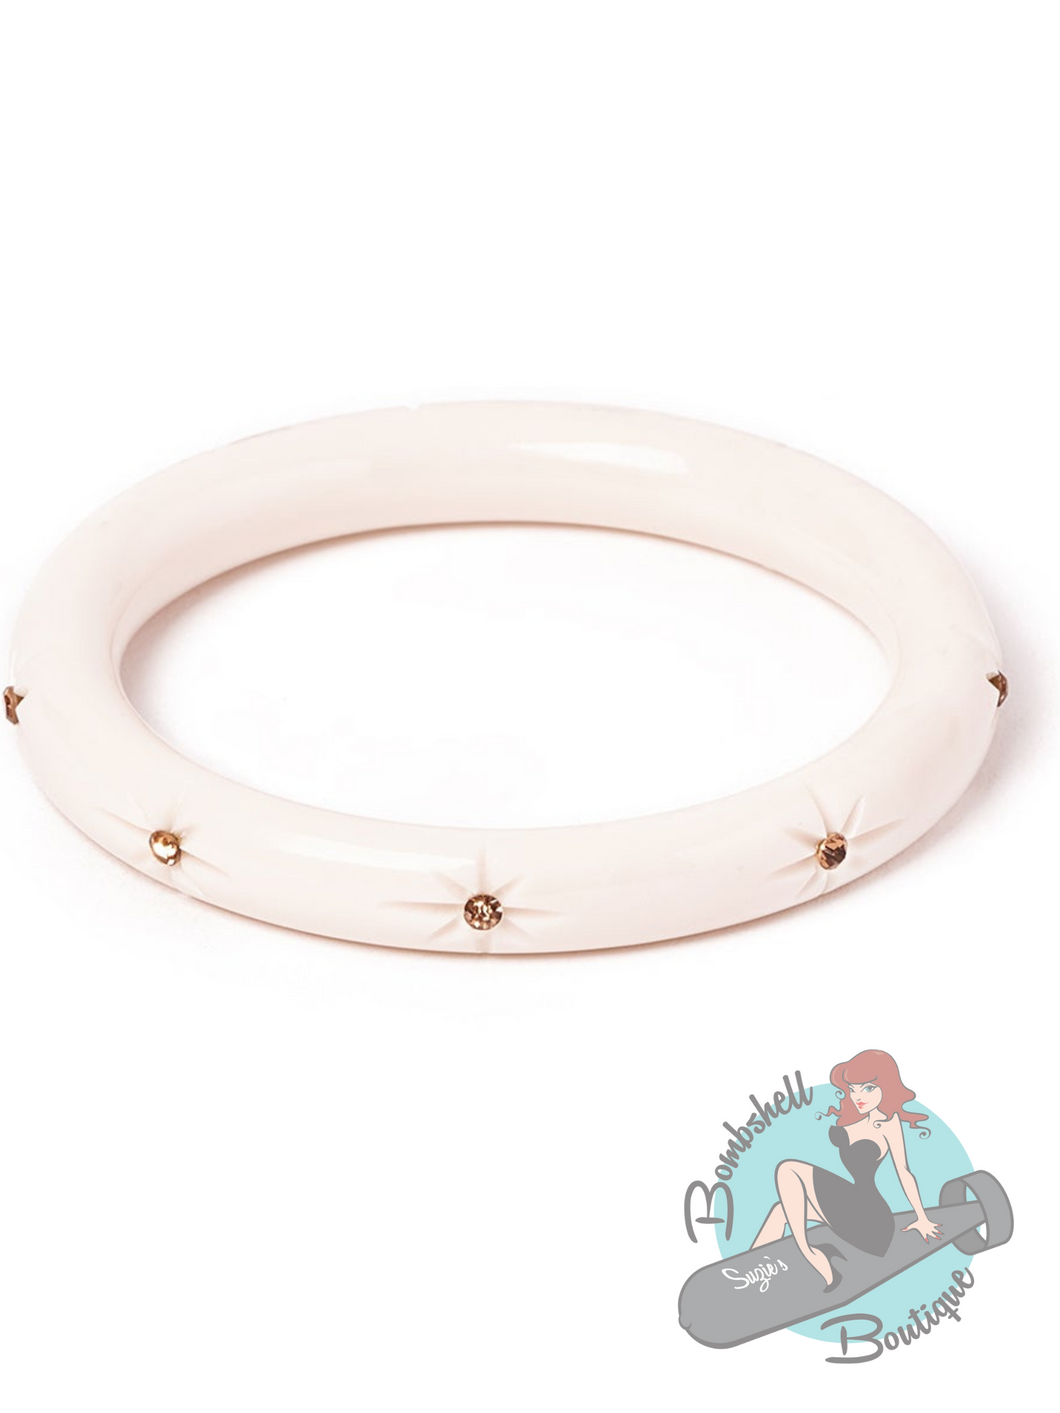 Narrow white bakelite style bangle with inlaid gold glitter starburst design. The perfect accessory for you pin up holiday dress.